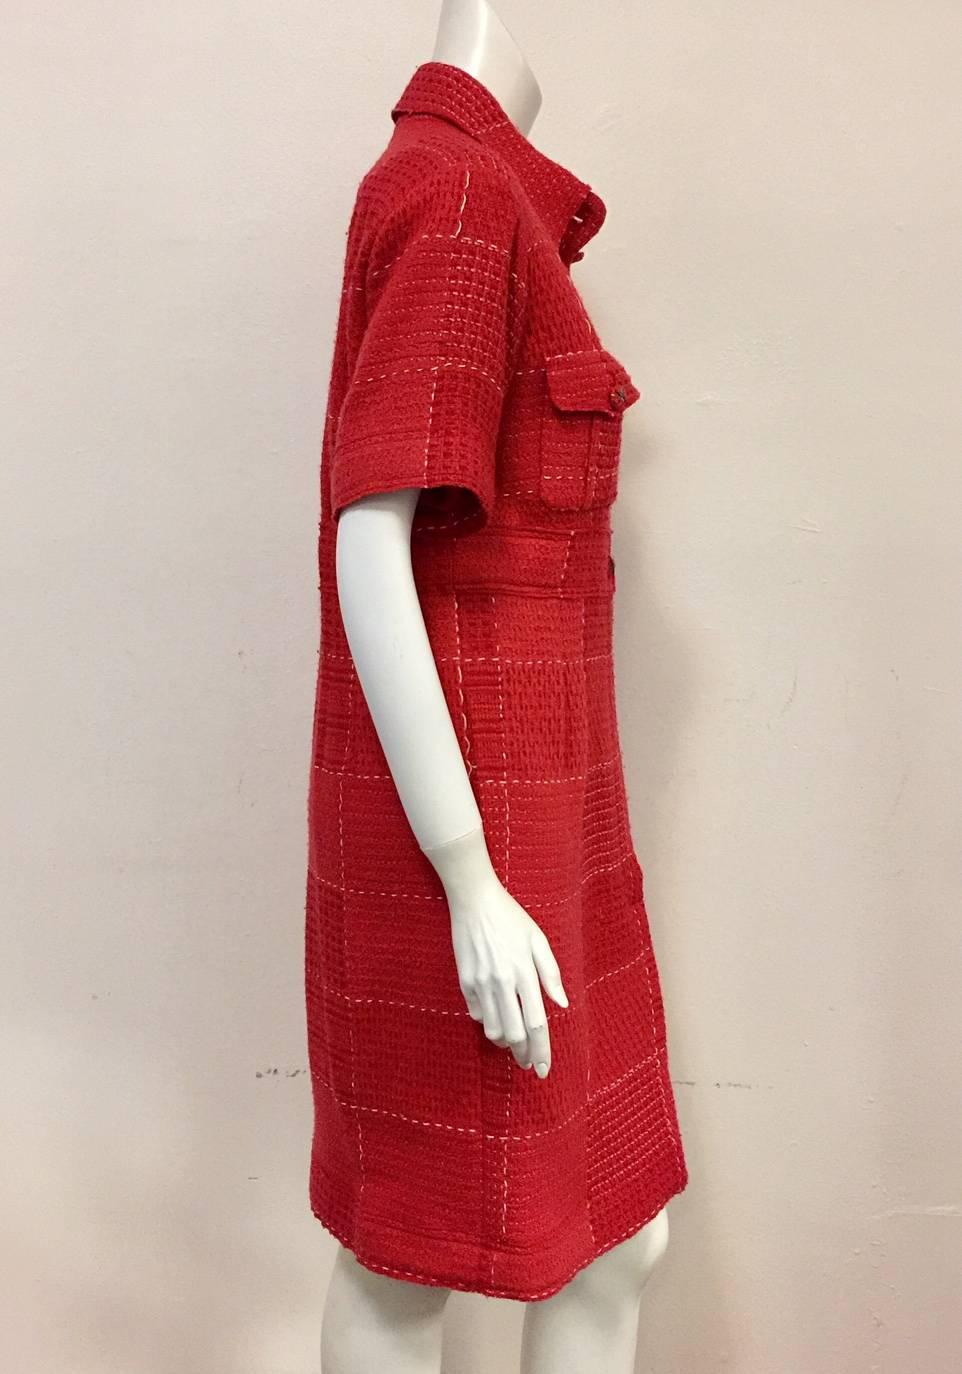 Classic Shirt Dress styling meets couture in Chanel's Strawberry Red Wool Dress!  Features signature substantial tweed fabric, spread collar, on-seam pockets and two patch pockets with buttons.  Front closure has two visible buttons and a placket